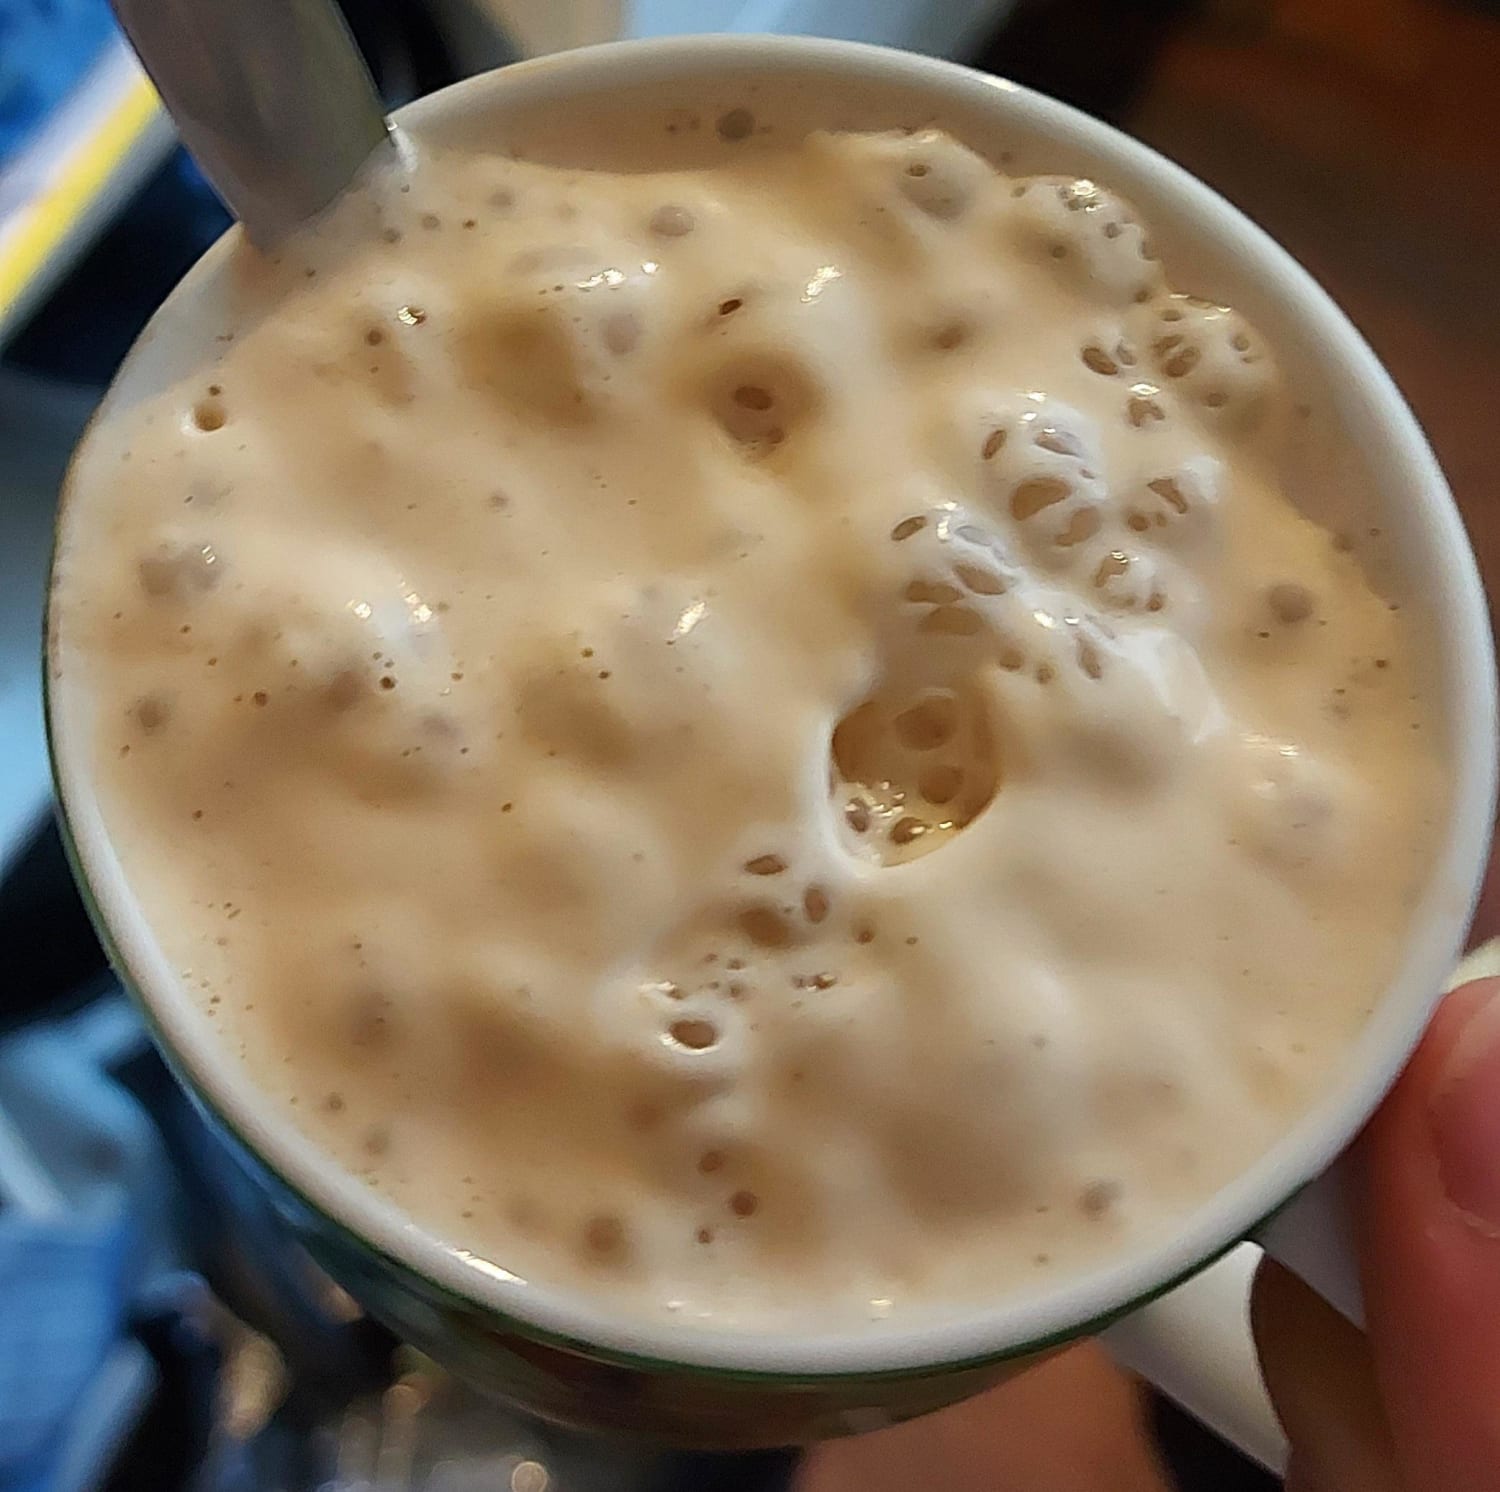 My cold brew coffee started bubbling when I added milk, also cold